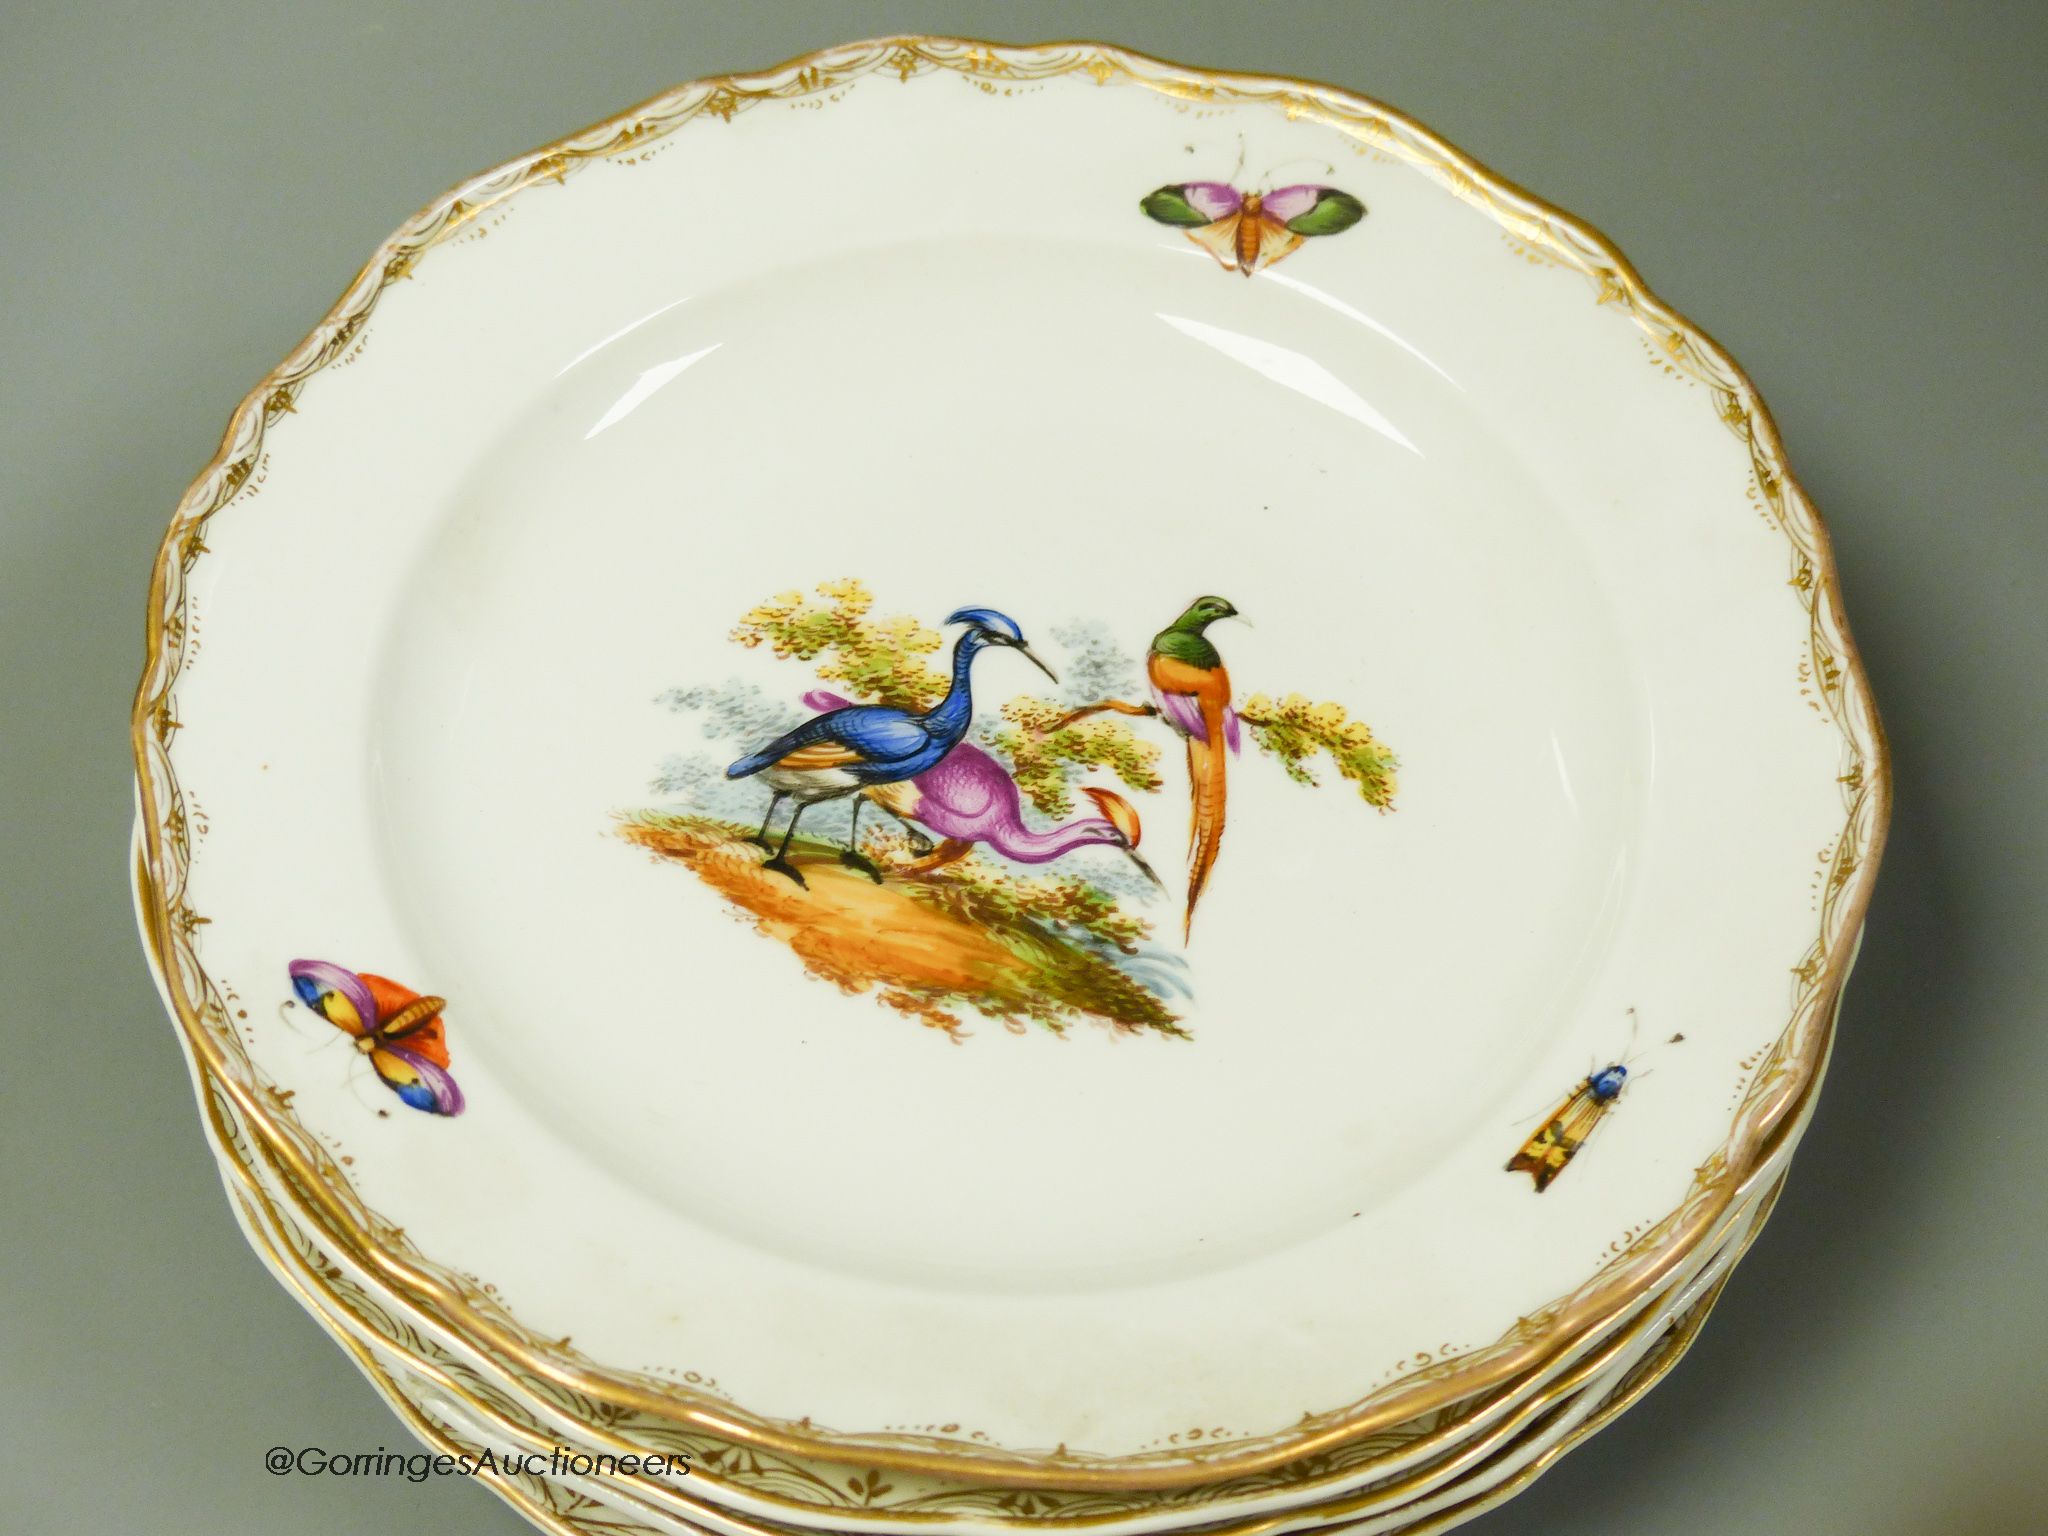 A set of six Meissen dessert dishes, painted with birds,factory seconds, 25.5cm diameter